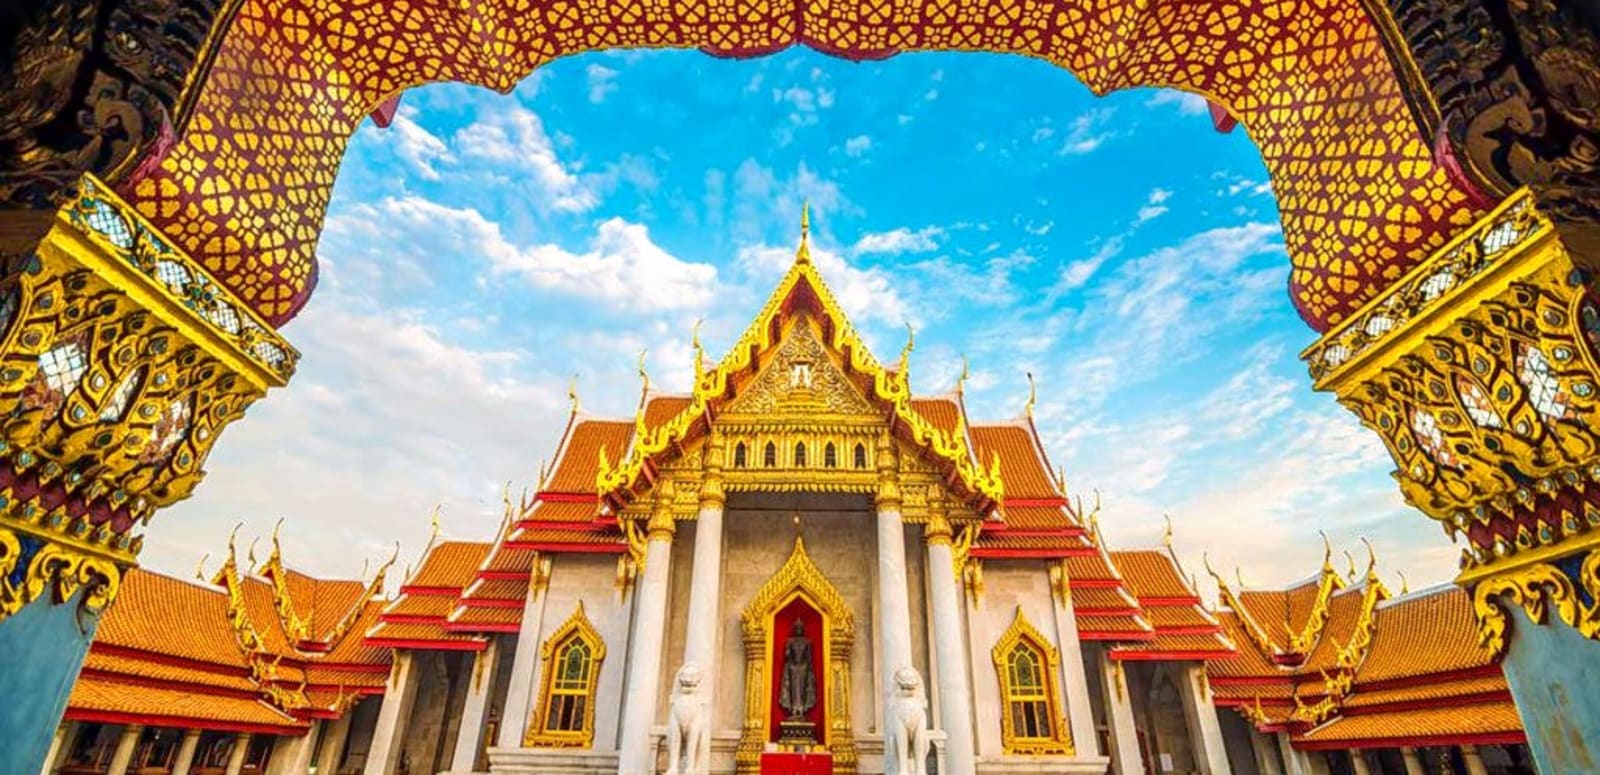 How Bangkok become one of the most famous tourist doors in Asia?